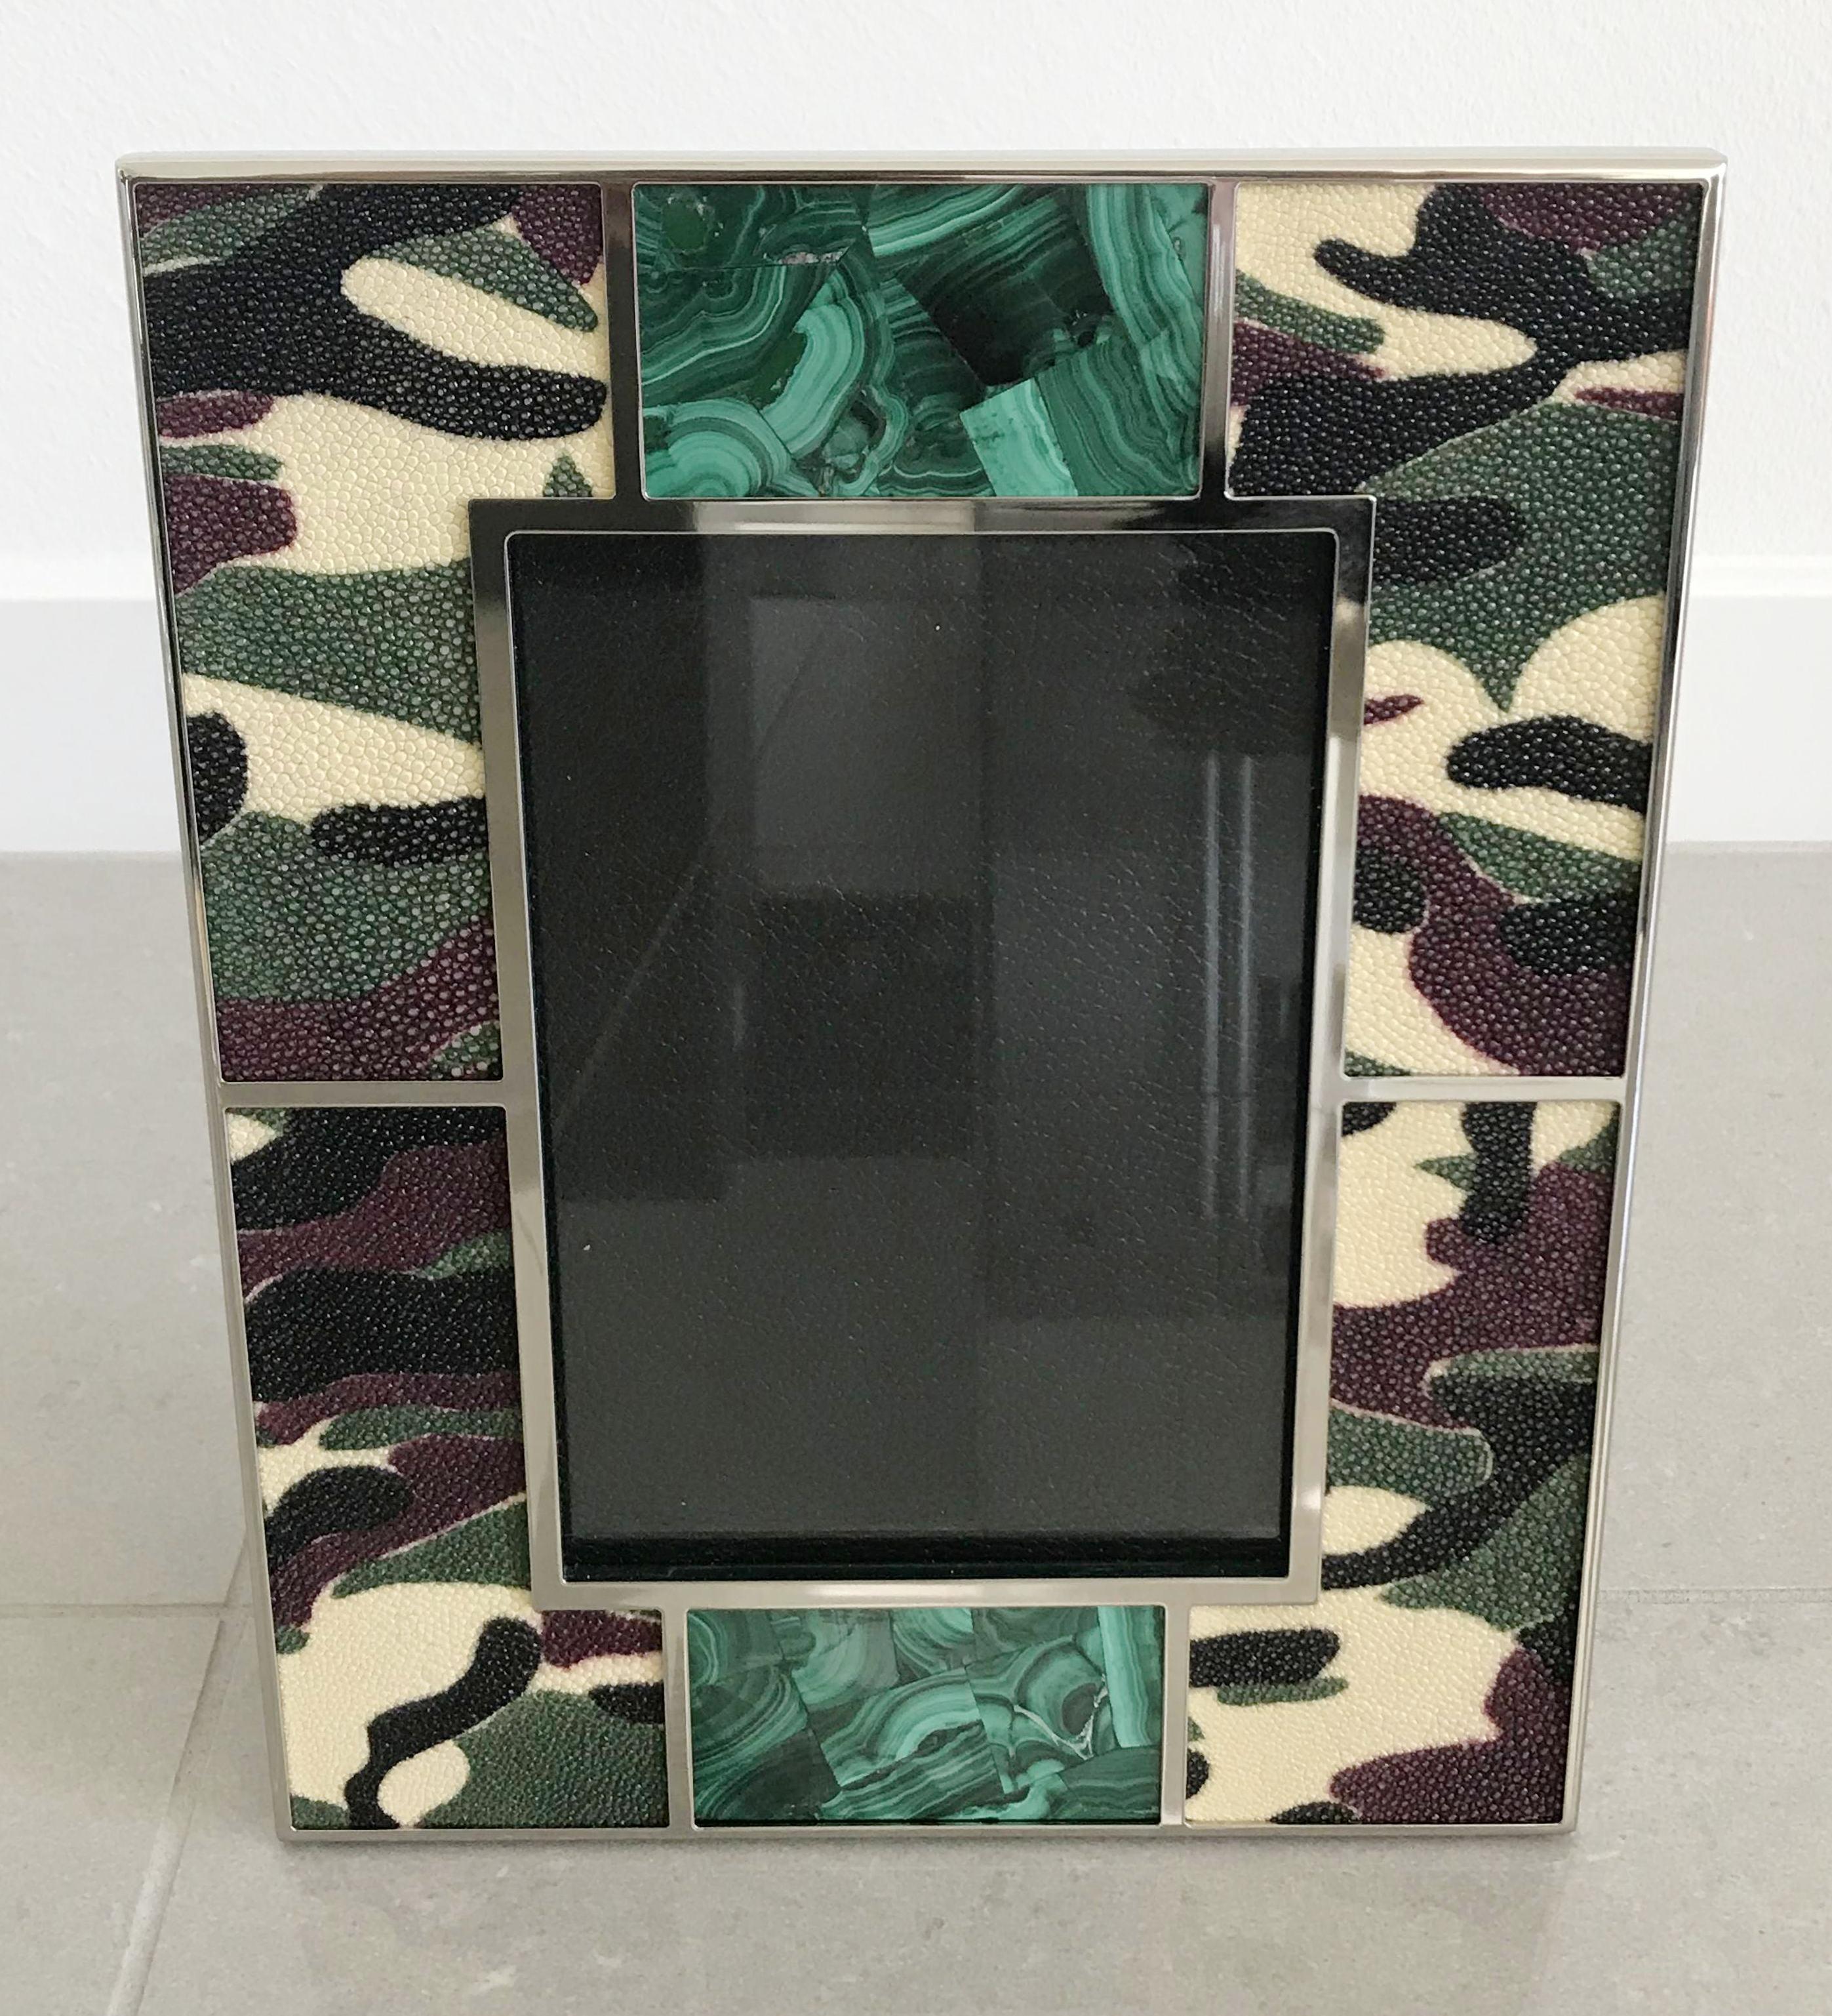 Camoflauge colored shagreen leather with malachite inserts and nickel-plated picture frame by Fabio Ltd
Measures: Height 10.5 inches / Width 8.5 inches / Depth 1 inch
Photo size: 5 inches by 7 inches
1 available in stock in Palm Springs currently ON